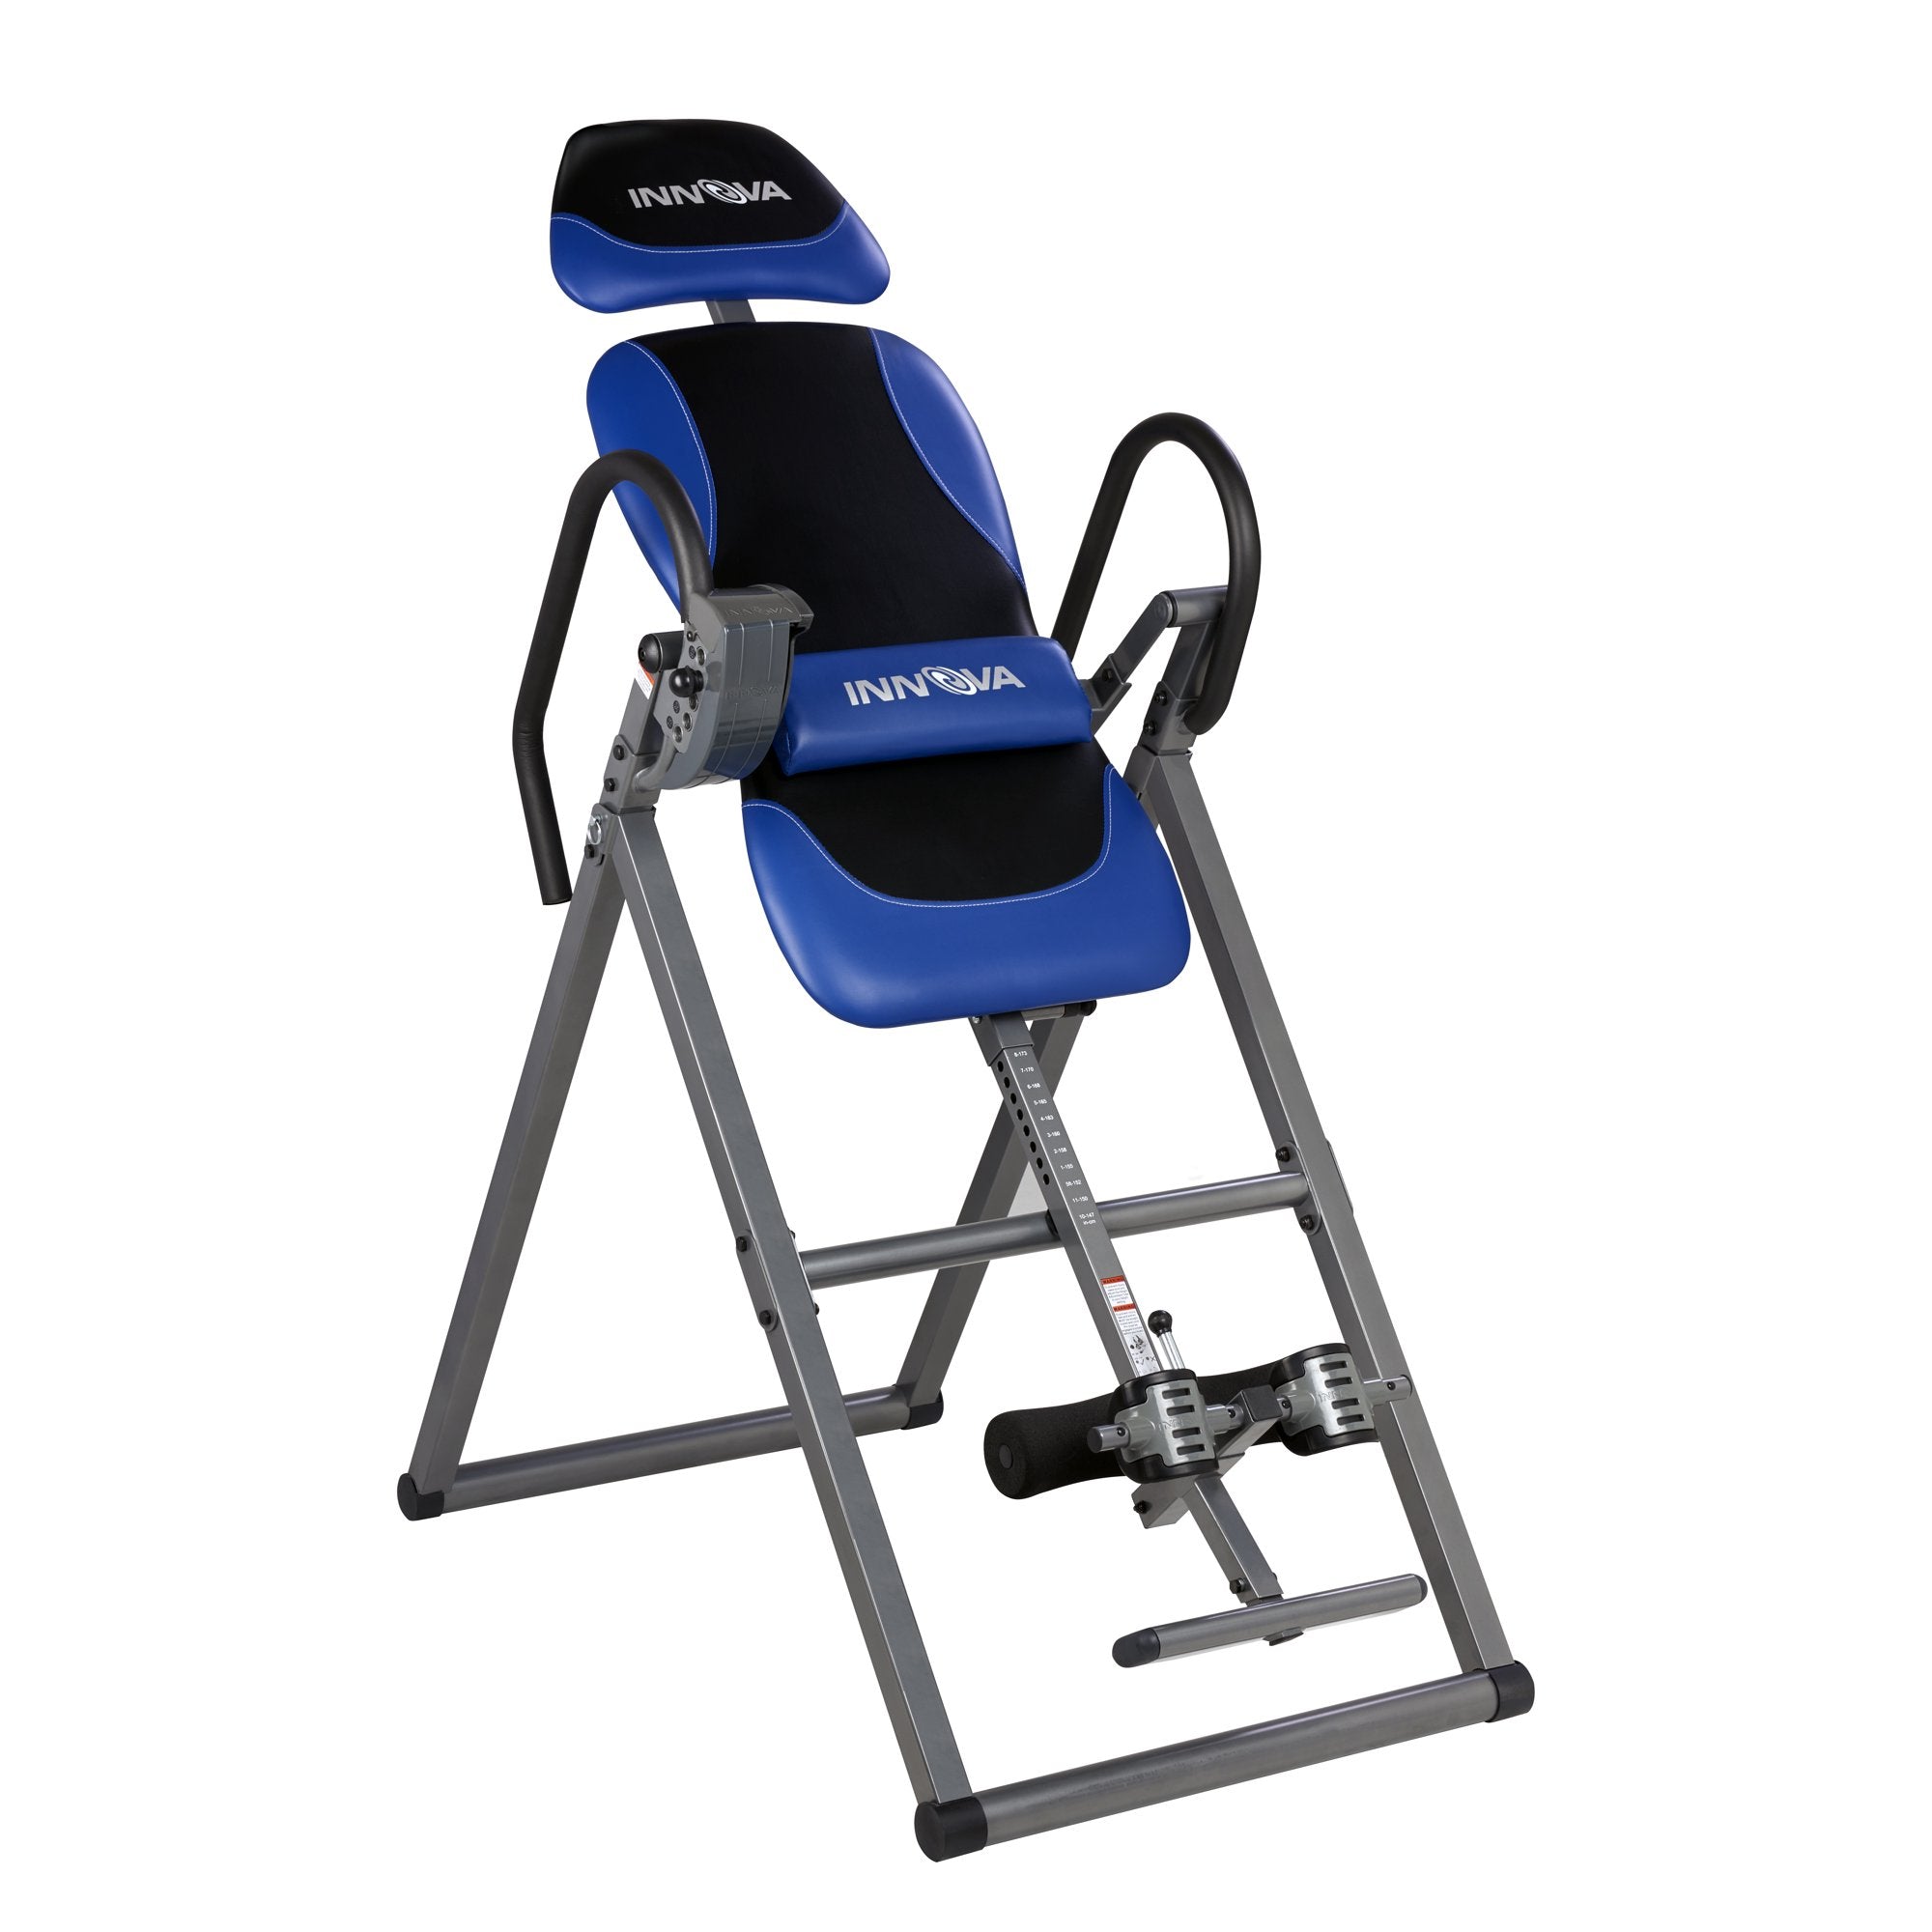 Inversion Table Back Therapy Fitness Pain Hang Gravity Relief-Inversion Tables-AULEY